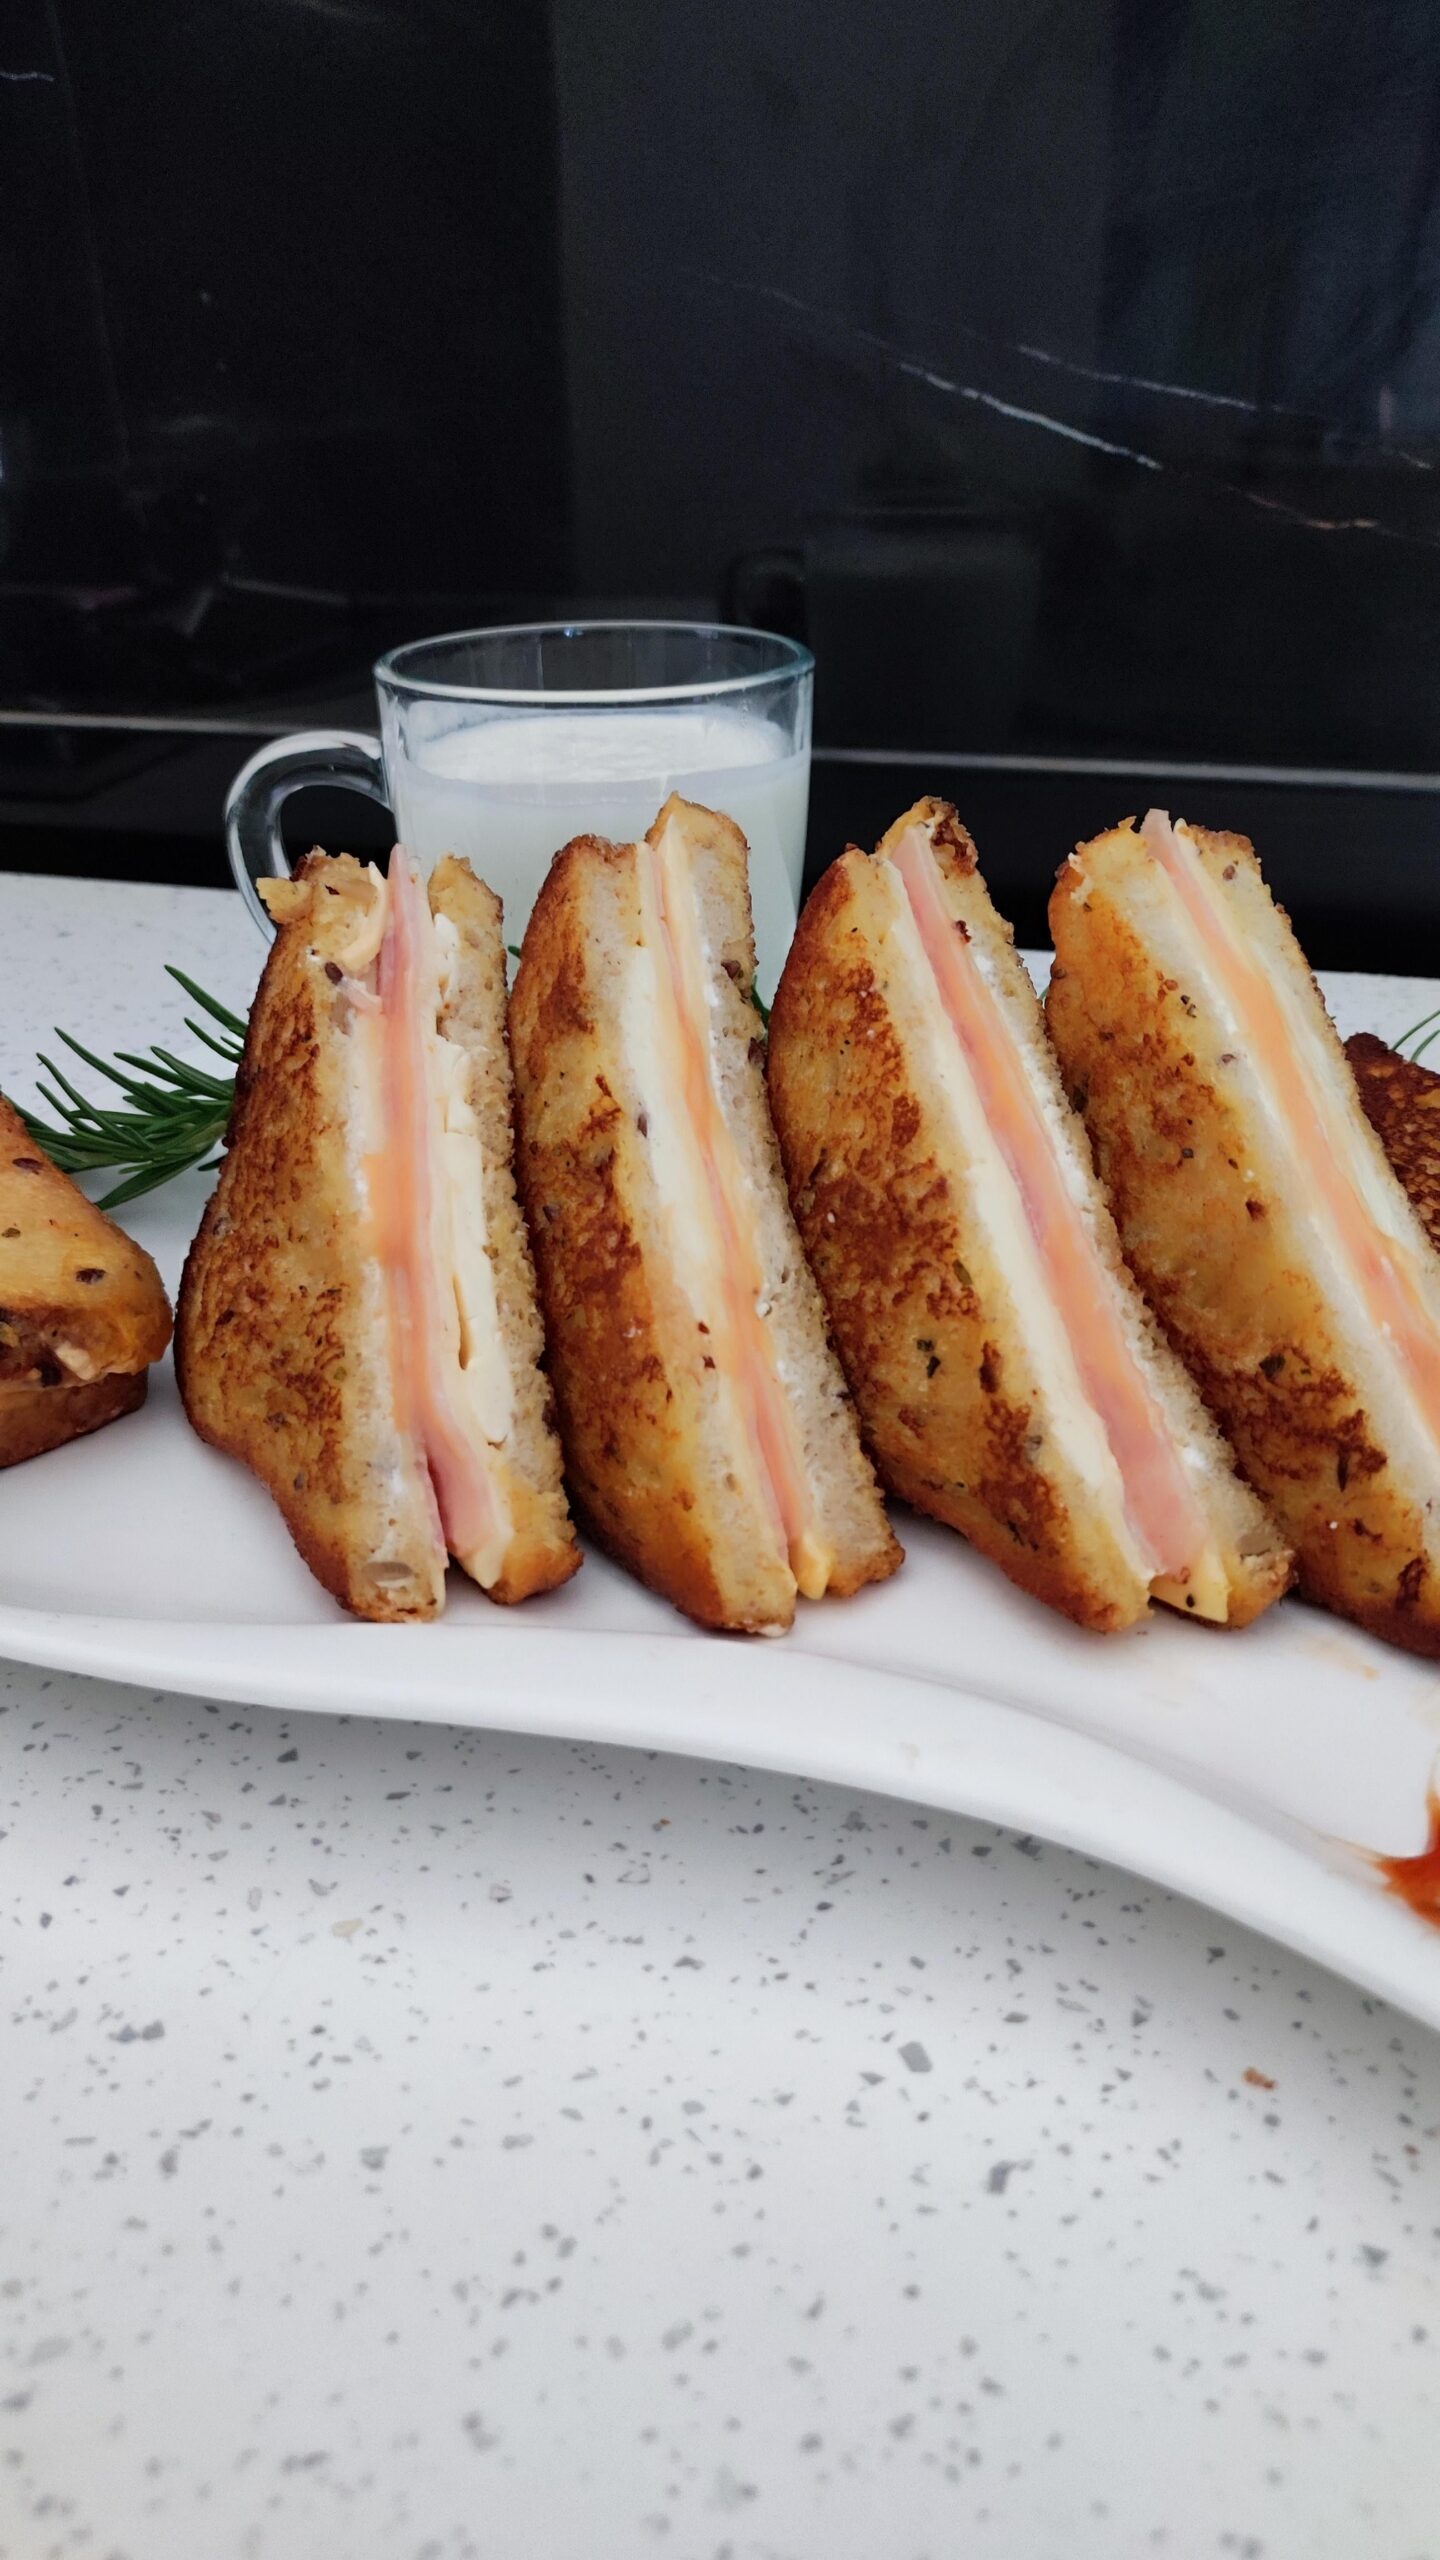 Stuffed fried slices a fantastic breakfast - Dining and Cooking